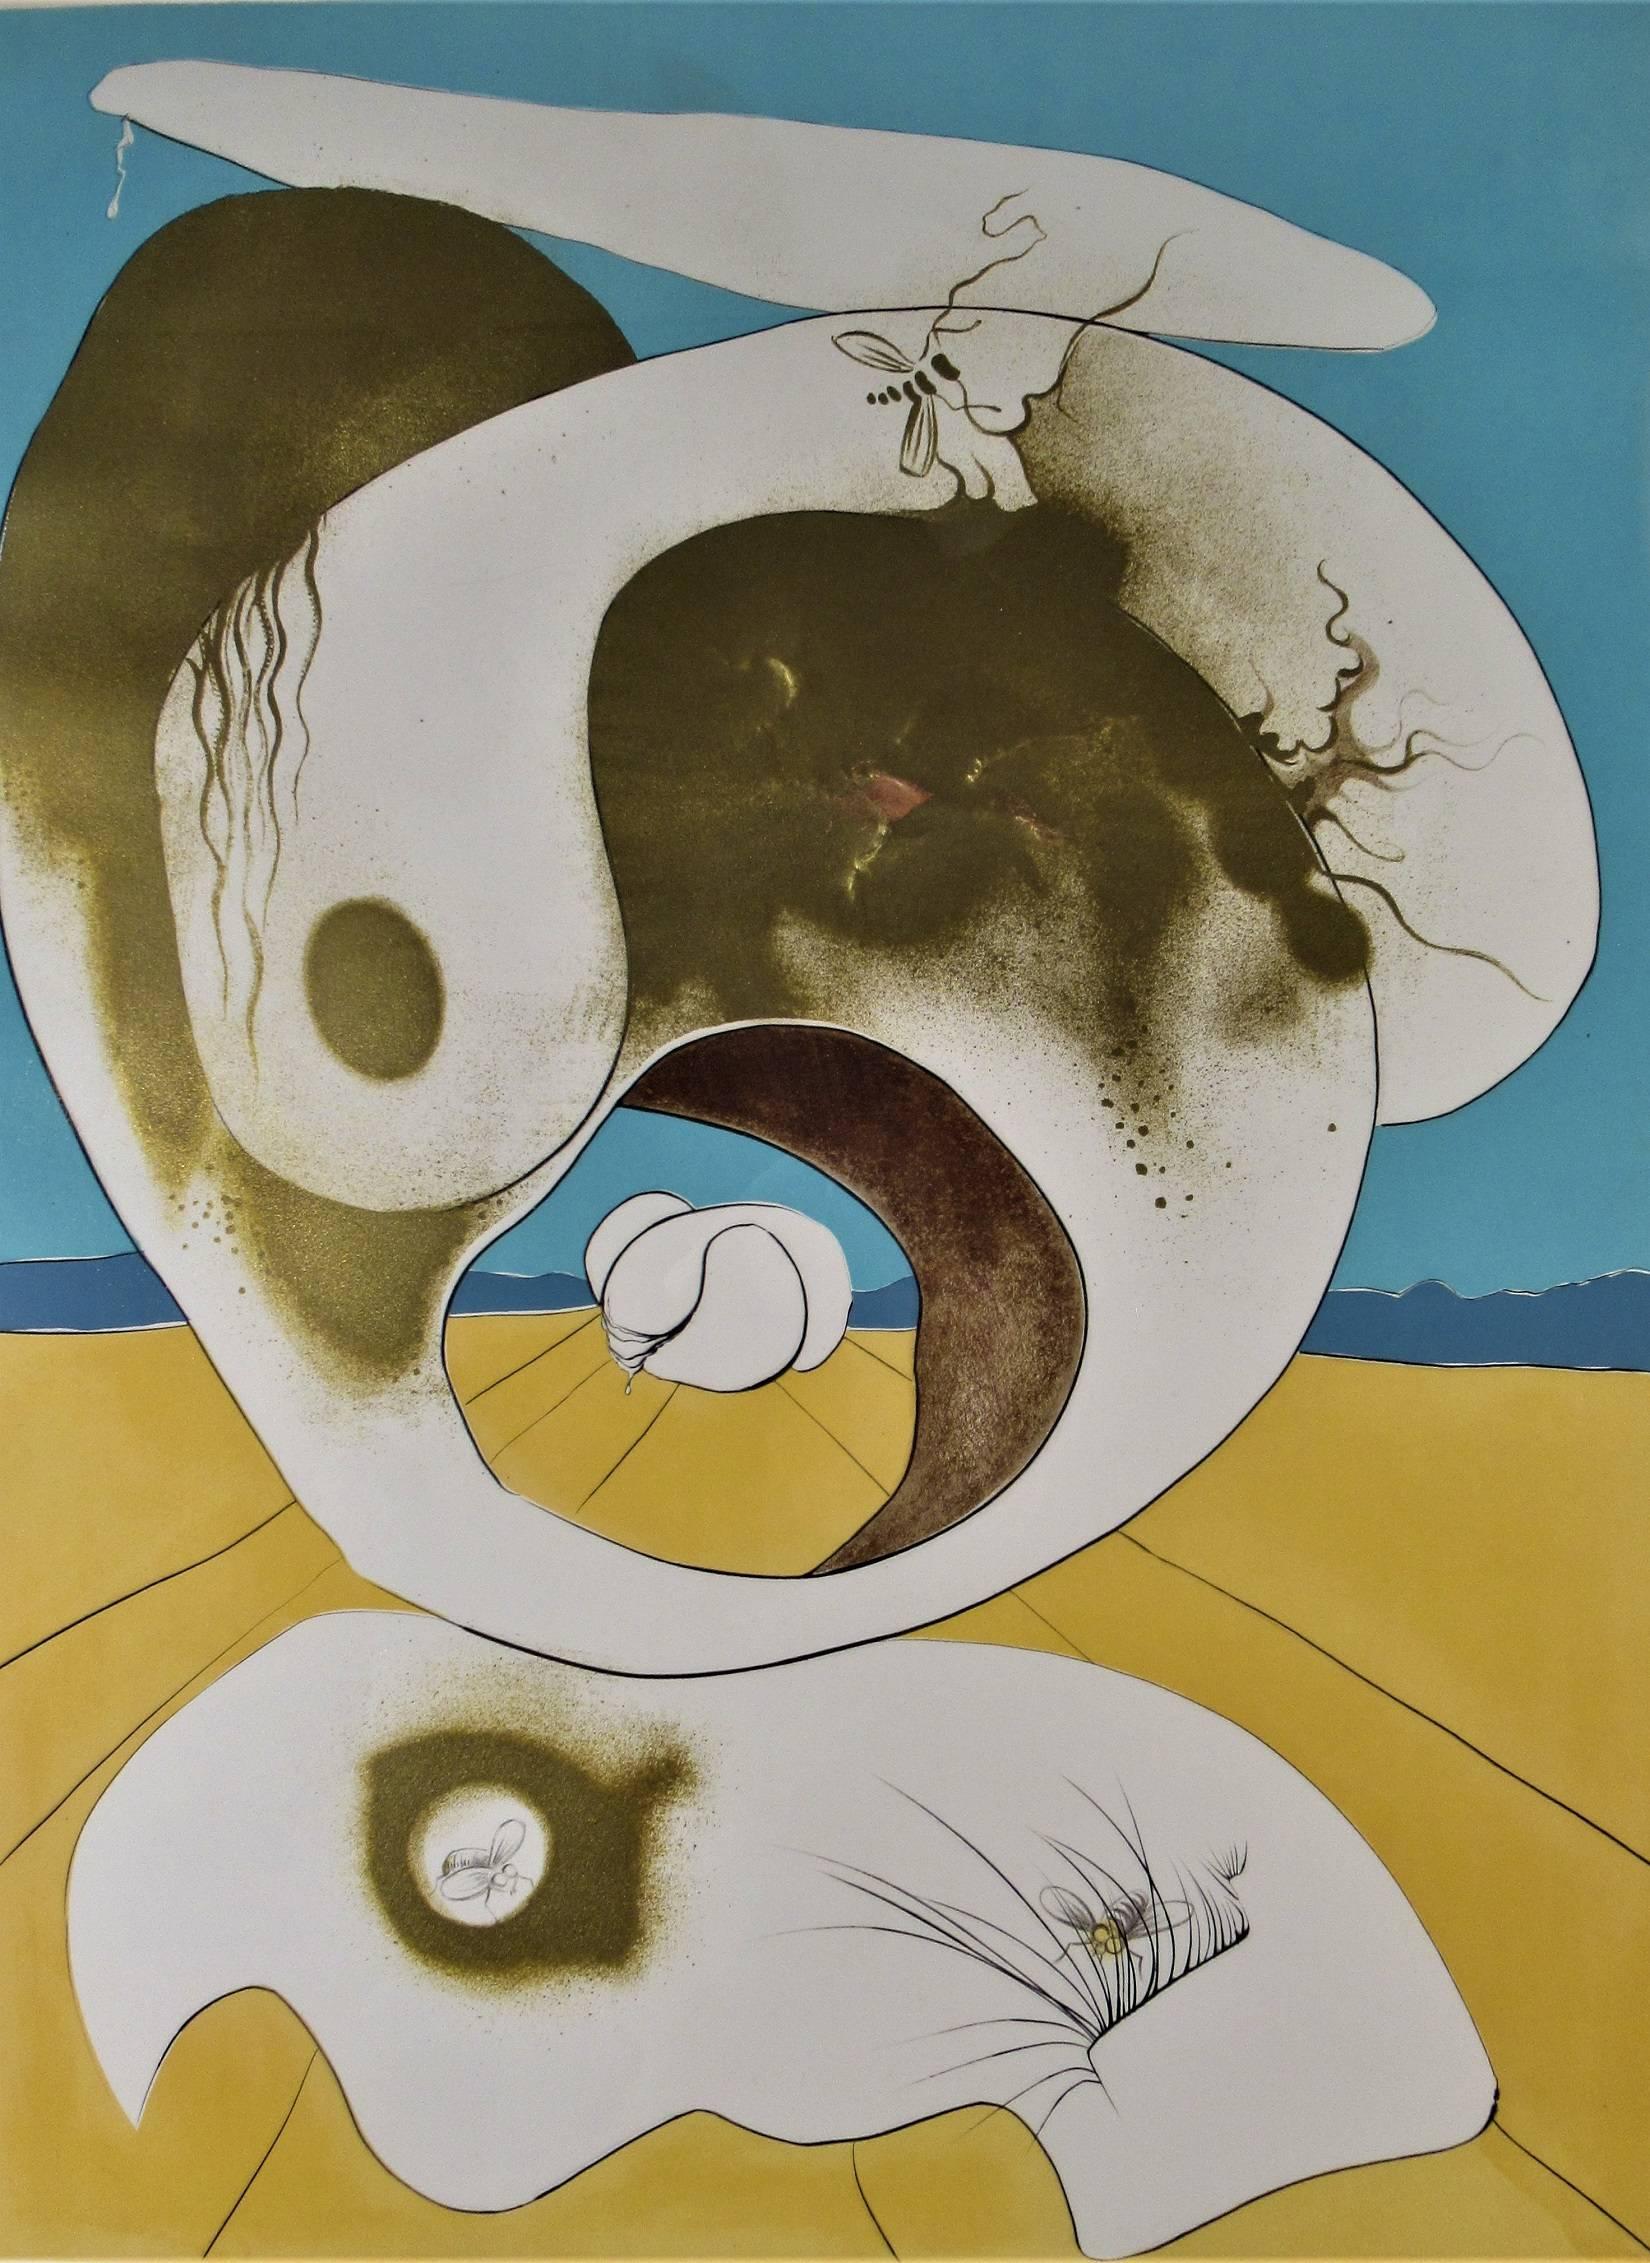 Planetary And Scatologic Vision - Print by Salvador Dalí